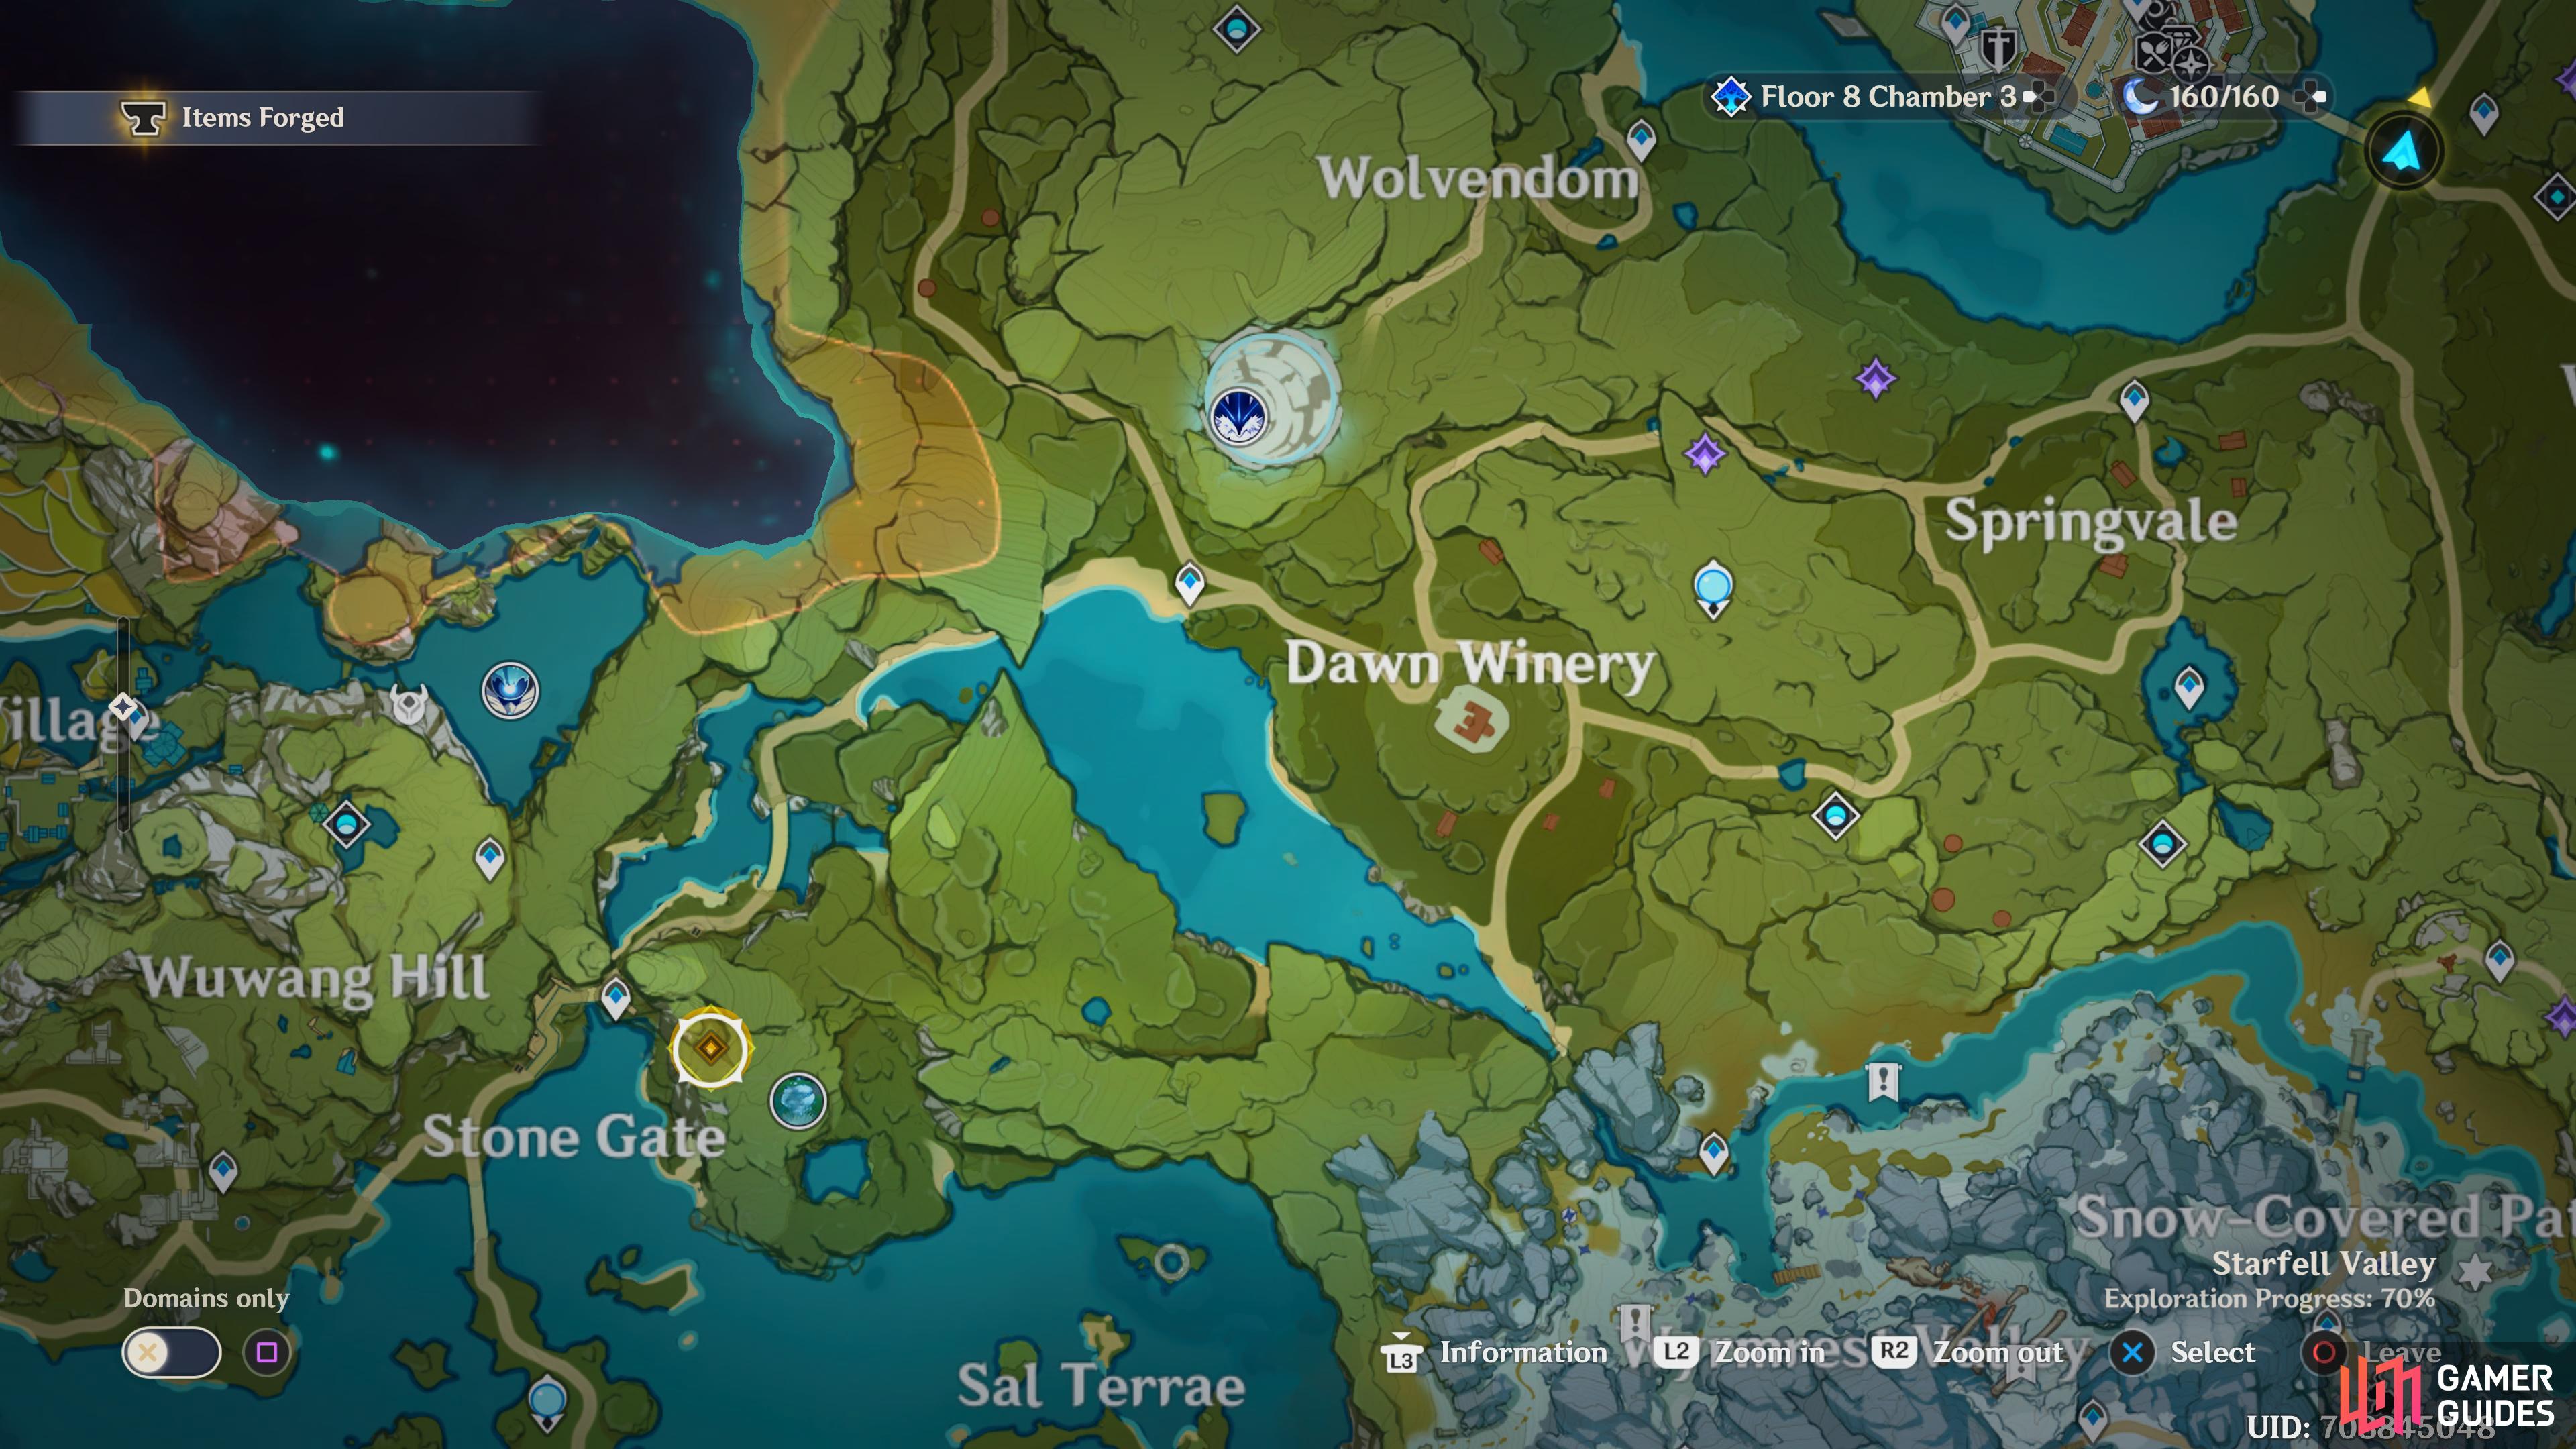 The Stone Gate can be found west of Dragonspine.